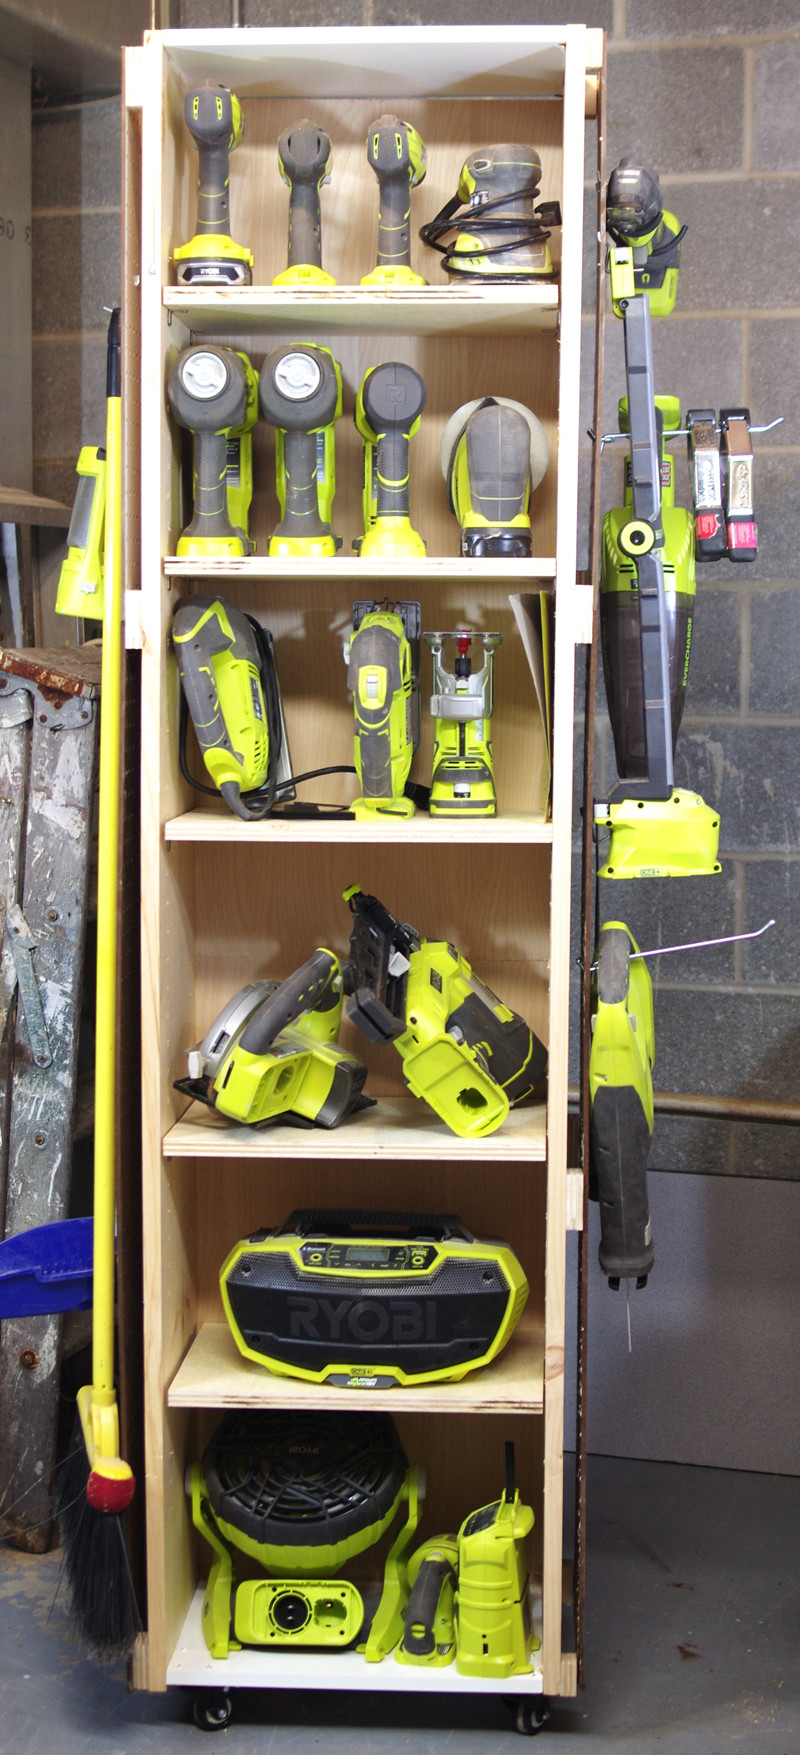 Best ideas about DIY Power Tool Storage
. Save or Pin DIY Power Tool Storage Unit on Wheels Create and Babble Now.